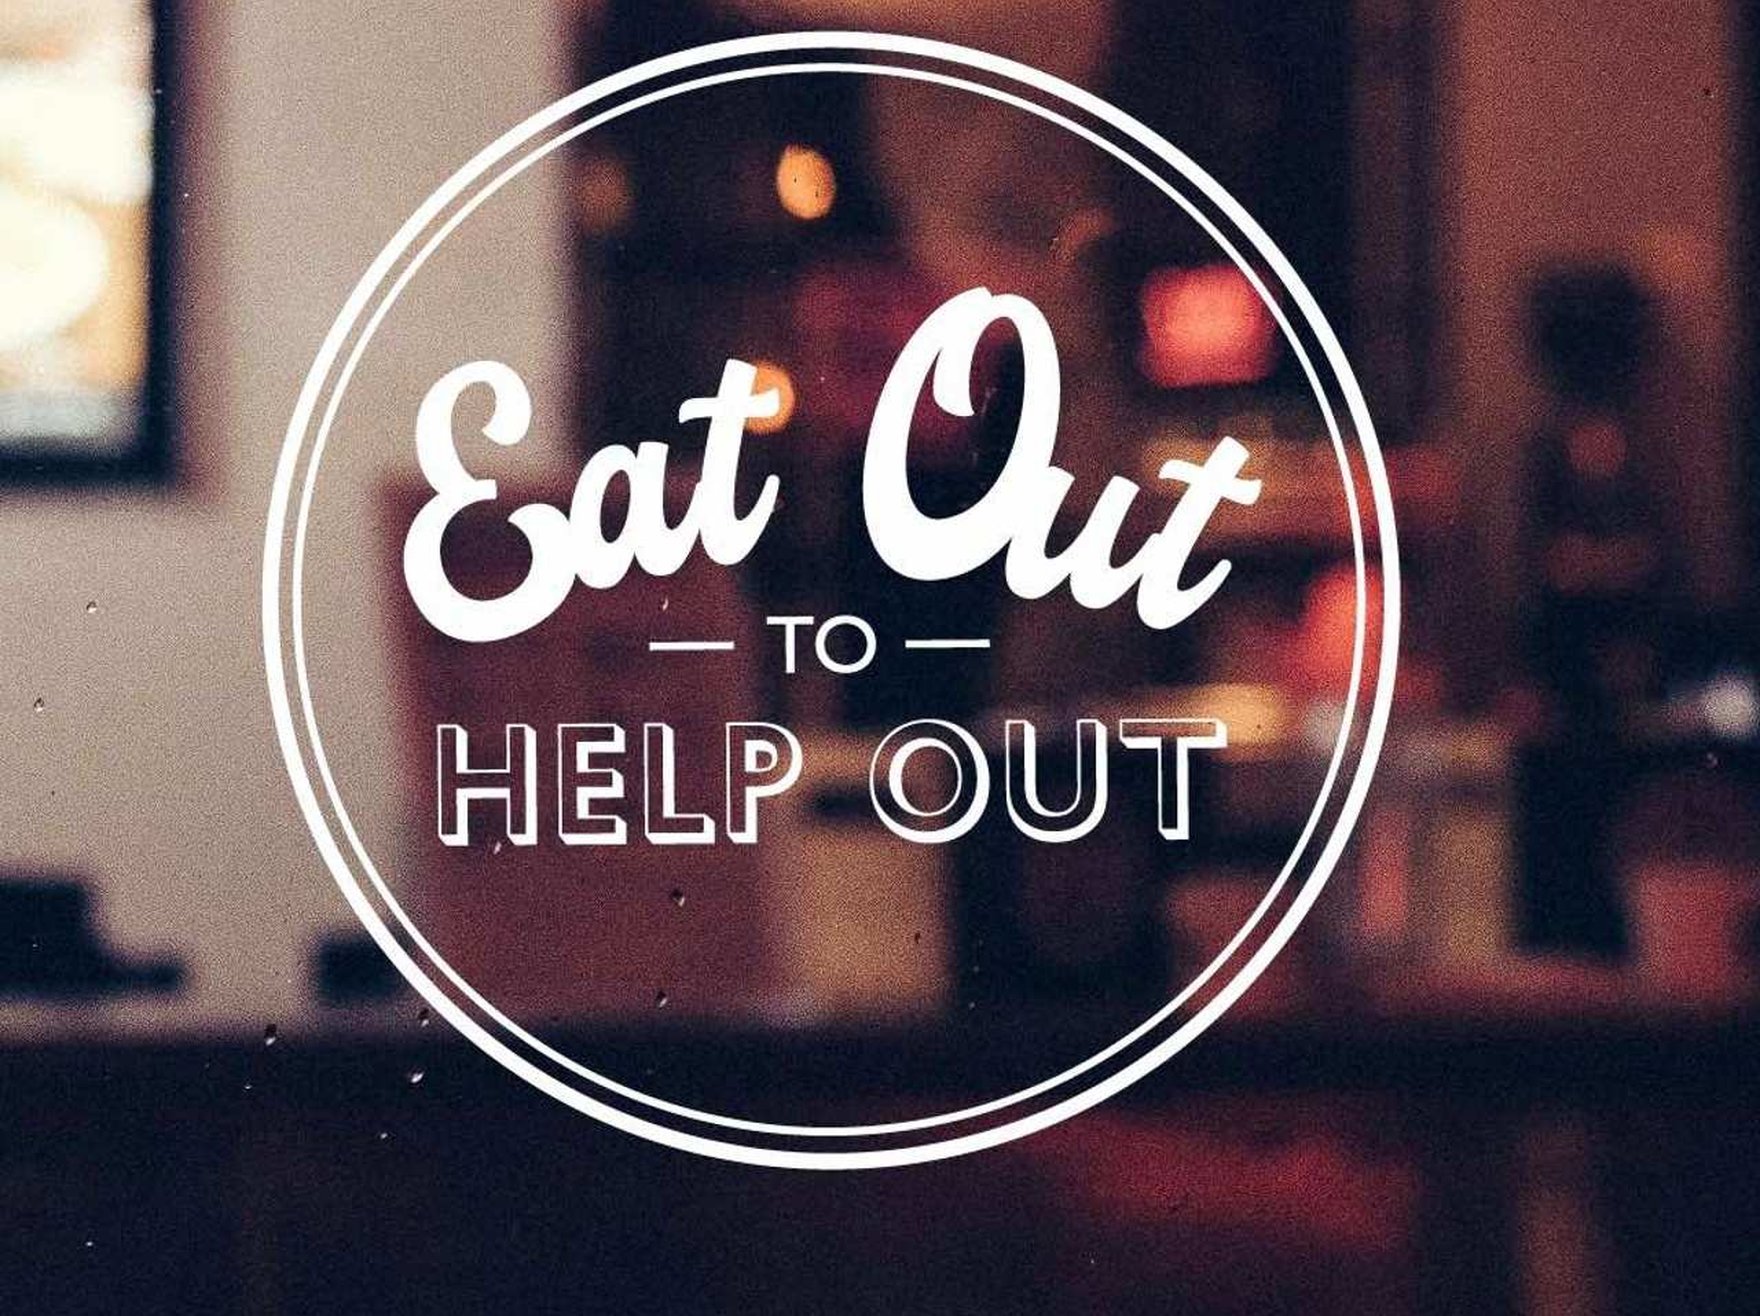 Eat Out To Help Out Scheme